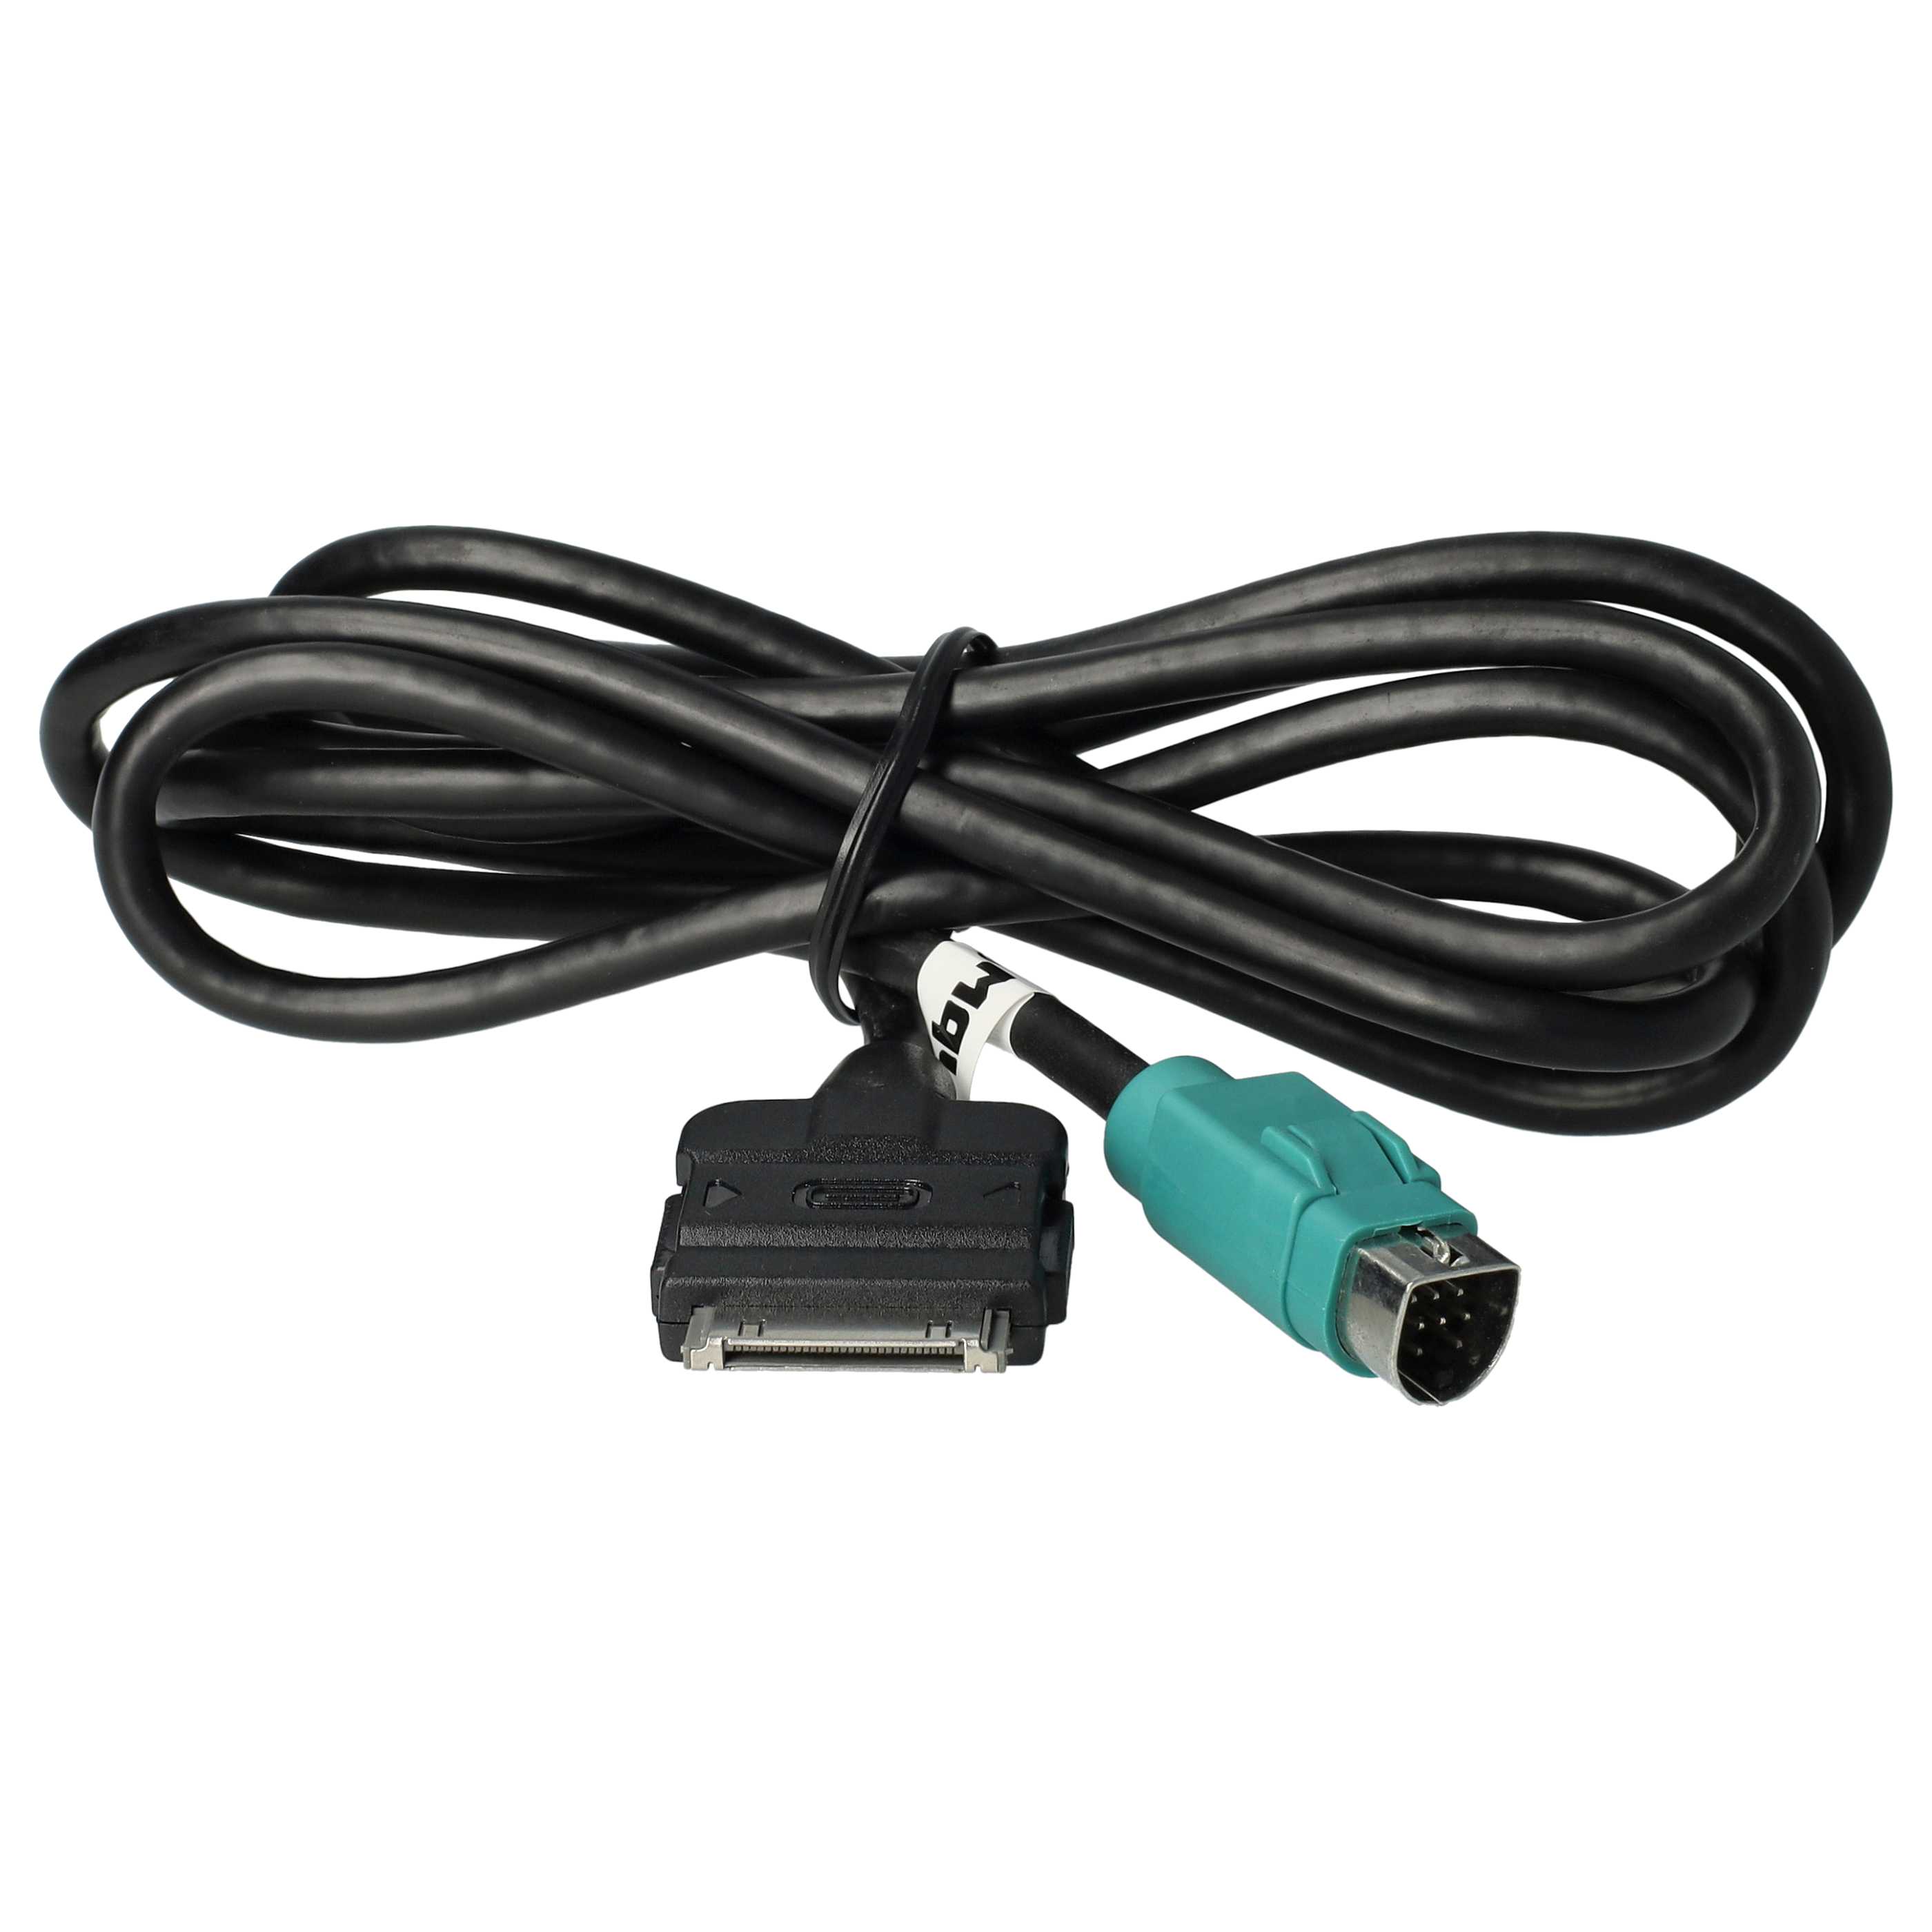 Audio Cable replaces Alpine KCE-422i for Alpine Car, Vehicle - 100 cm long